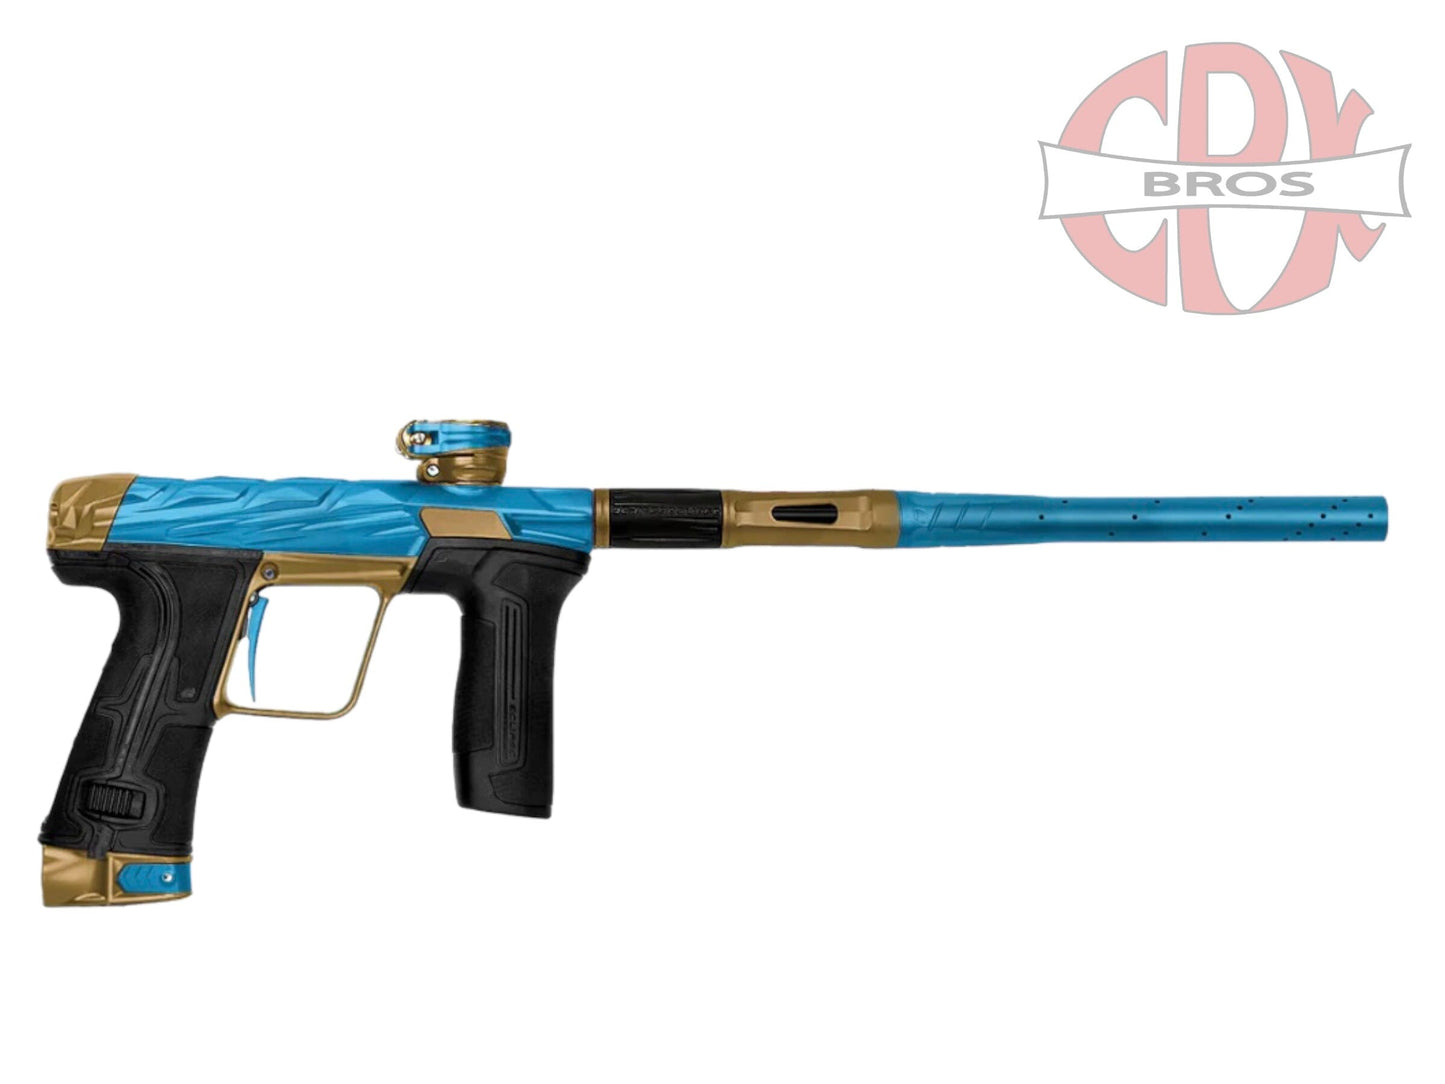 Used NEW PLANET ECLIPSE CS3 - INFAMOUS EDITION BLUE/TAN Paintball Gun from CPXBrosPaintball Buy/Sell/Trade Paintball Markers, New Paintball Guns, Paintball Hoppers, Paintball Masks, and Hormesis Headbands